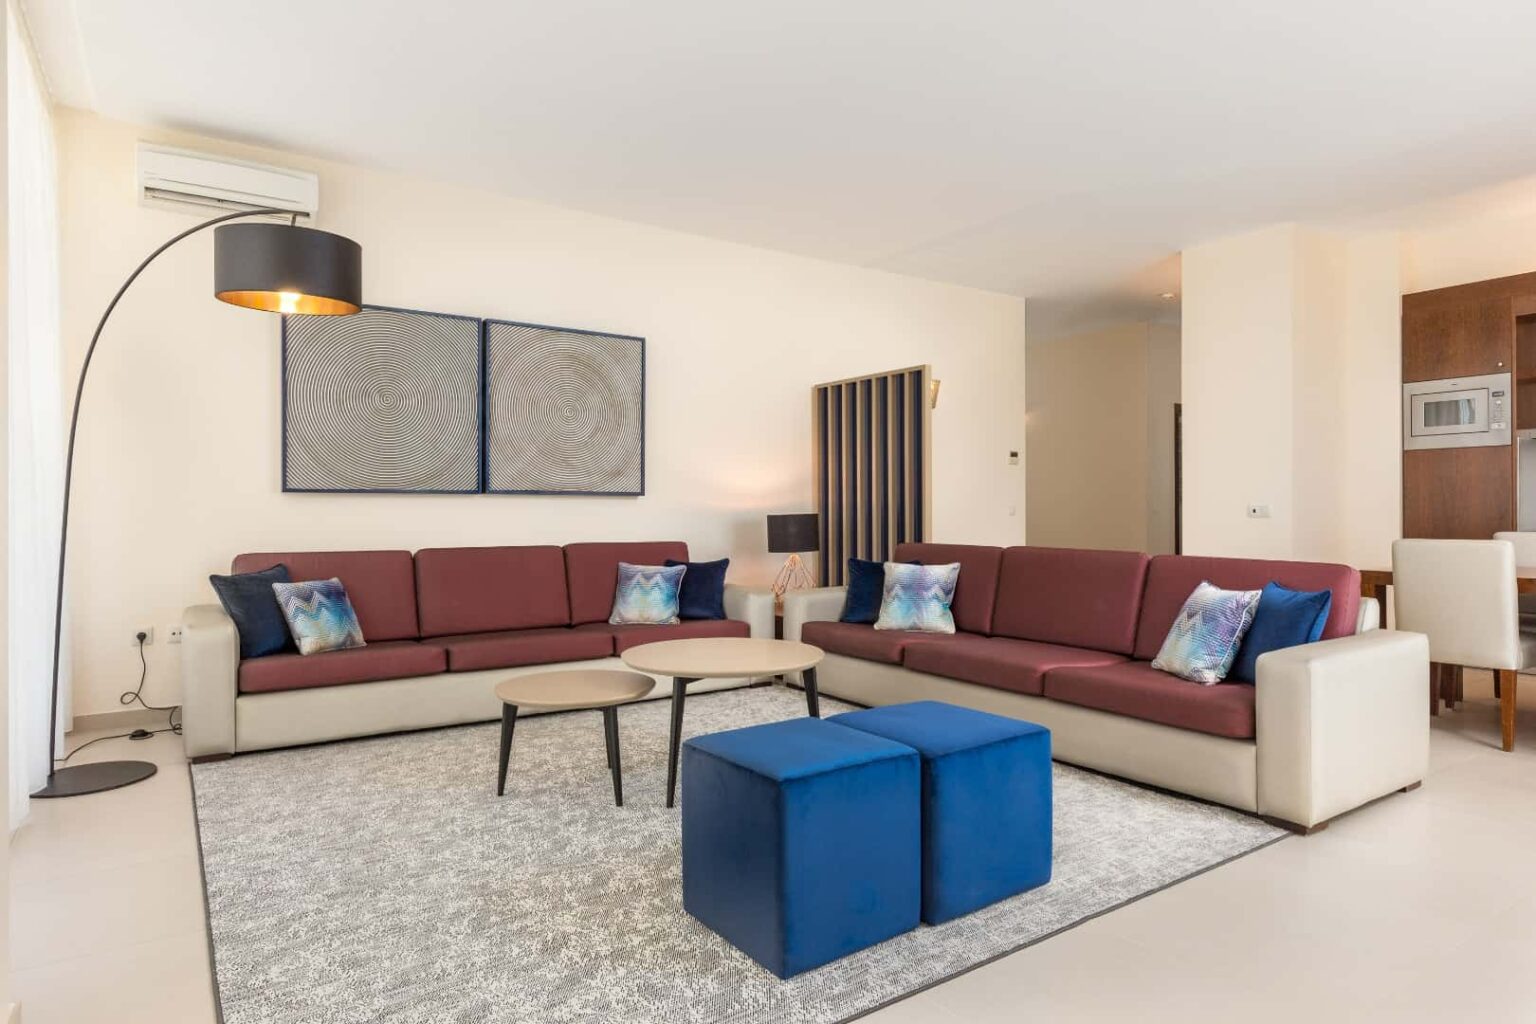 3 Bedroom Suite living area with plush sofas and coffee table